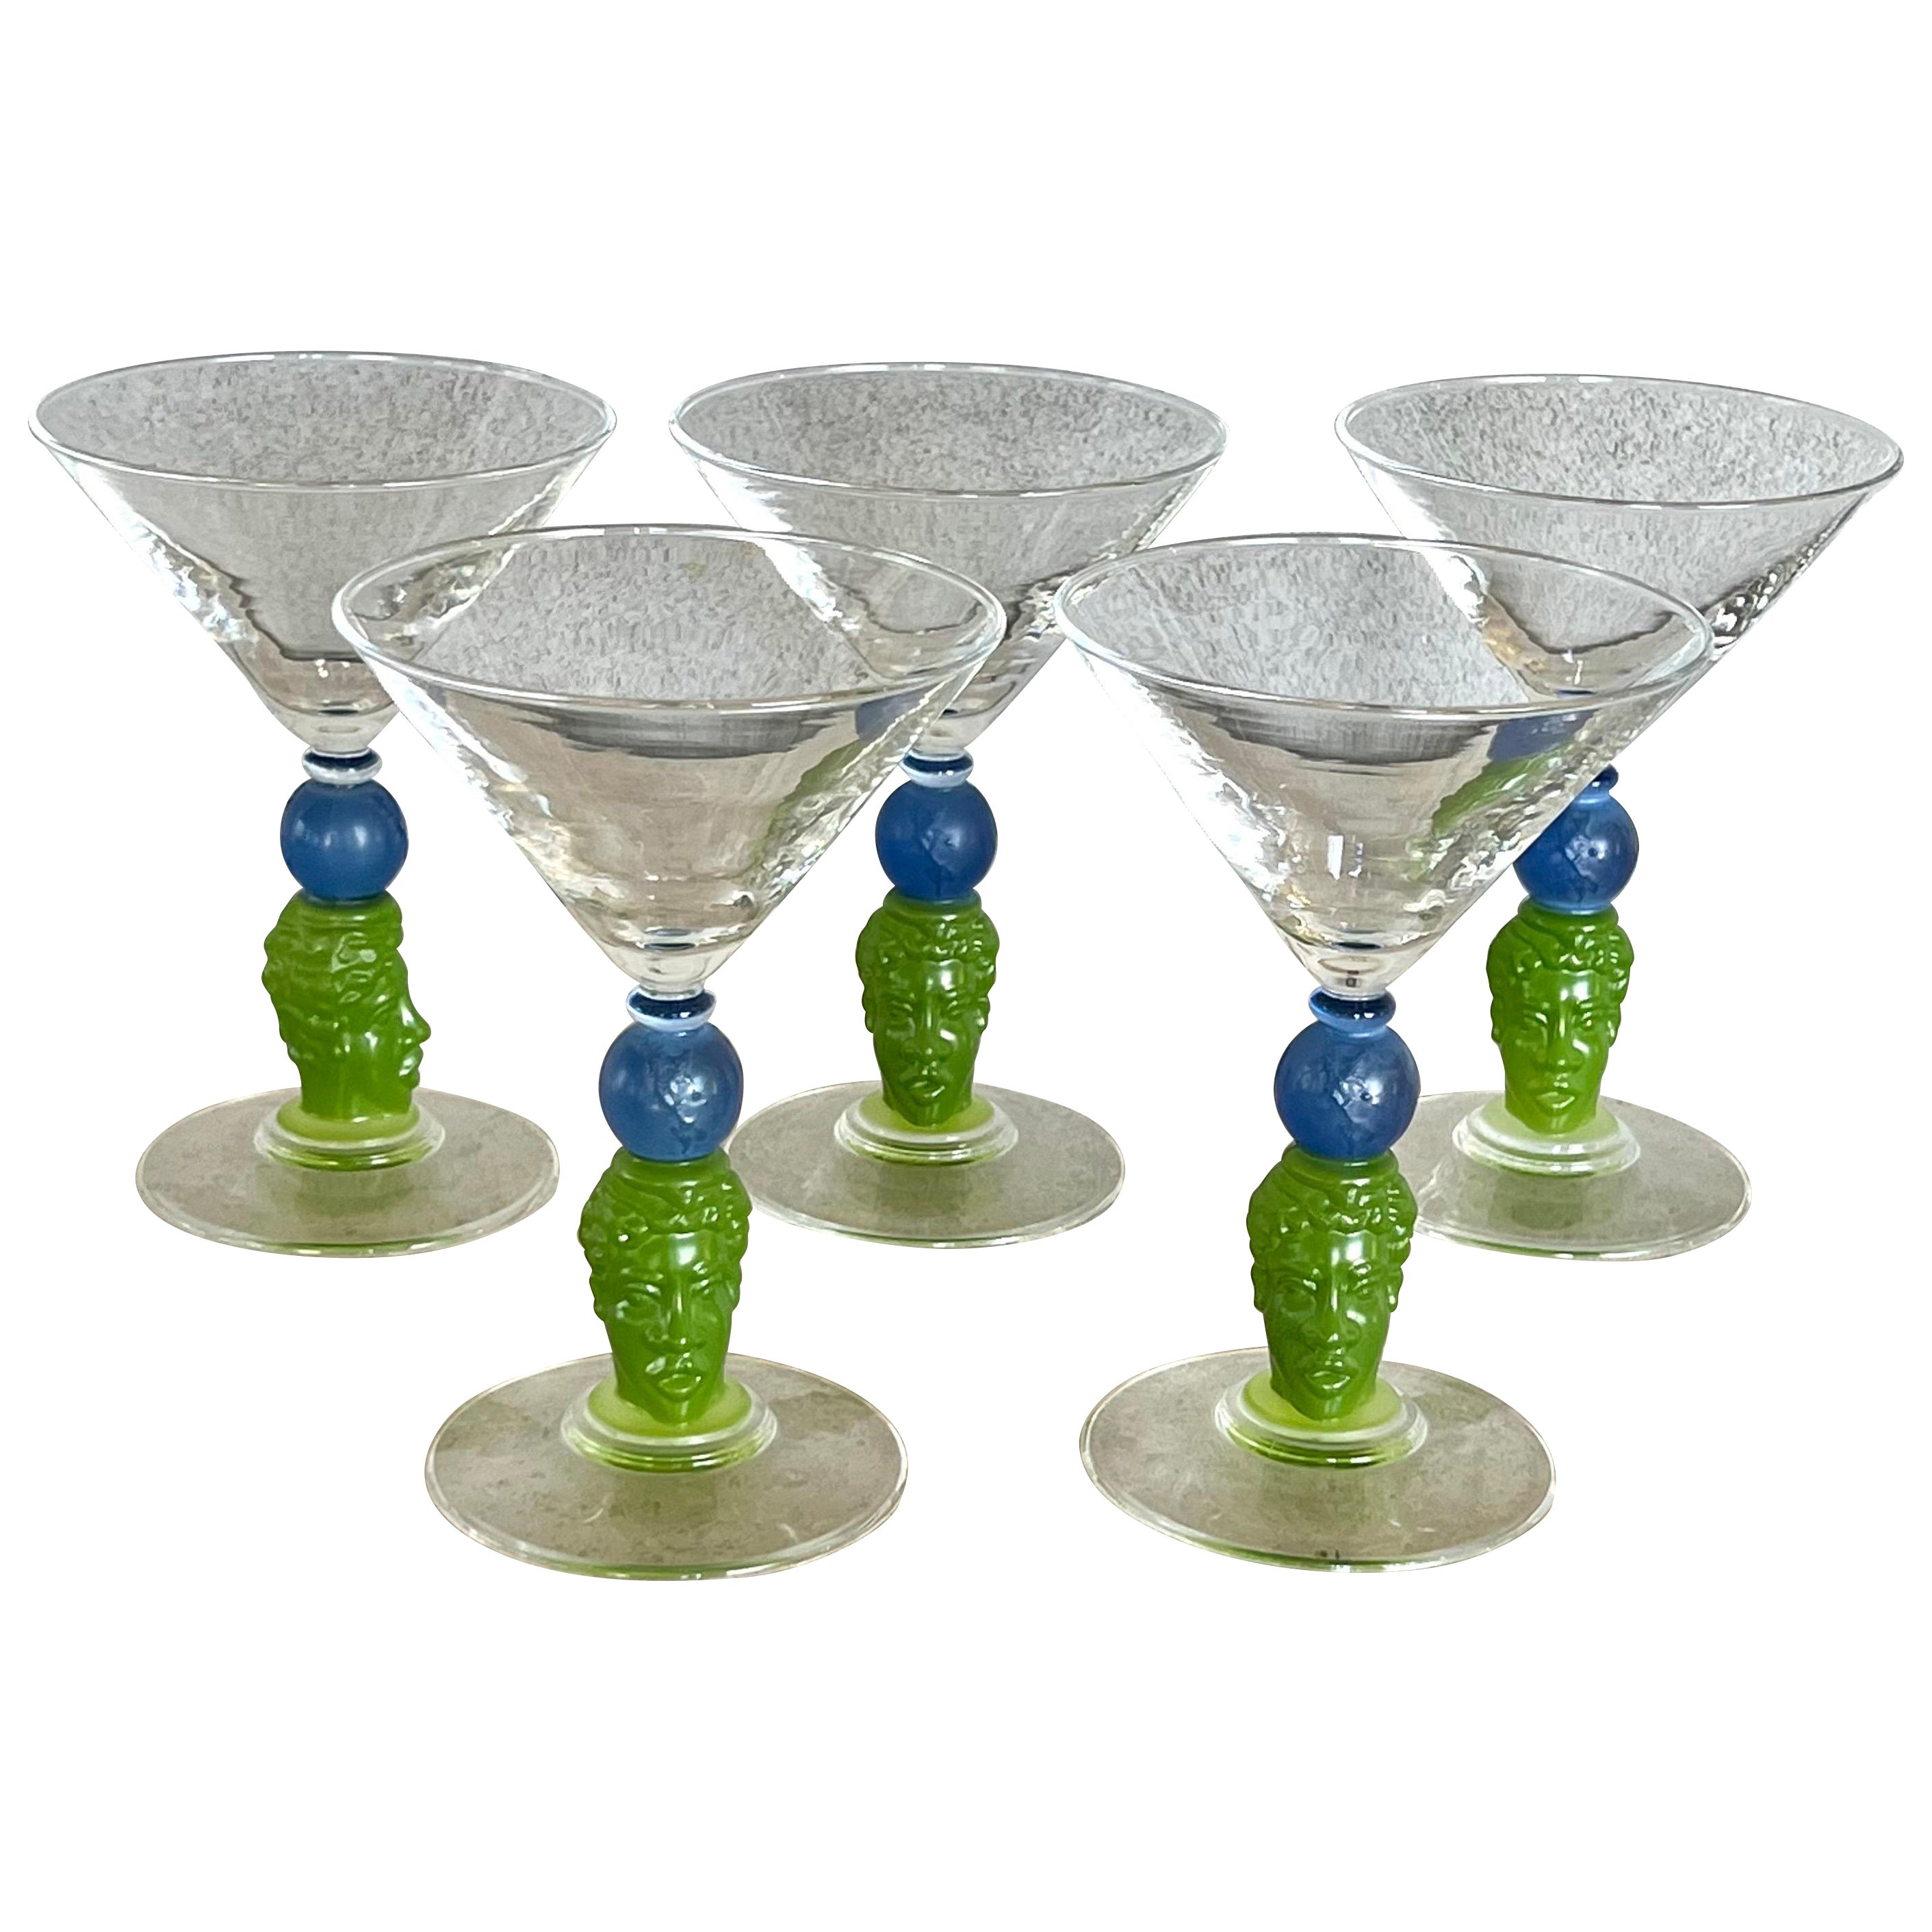 Five Signed Richard Jolley Martini Glasses Limited Edition